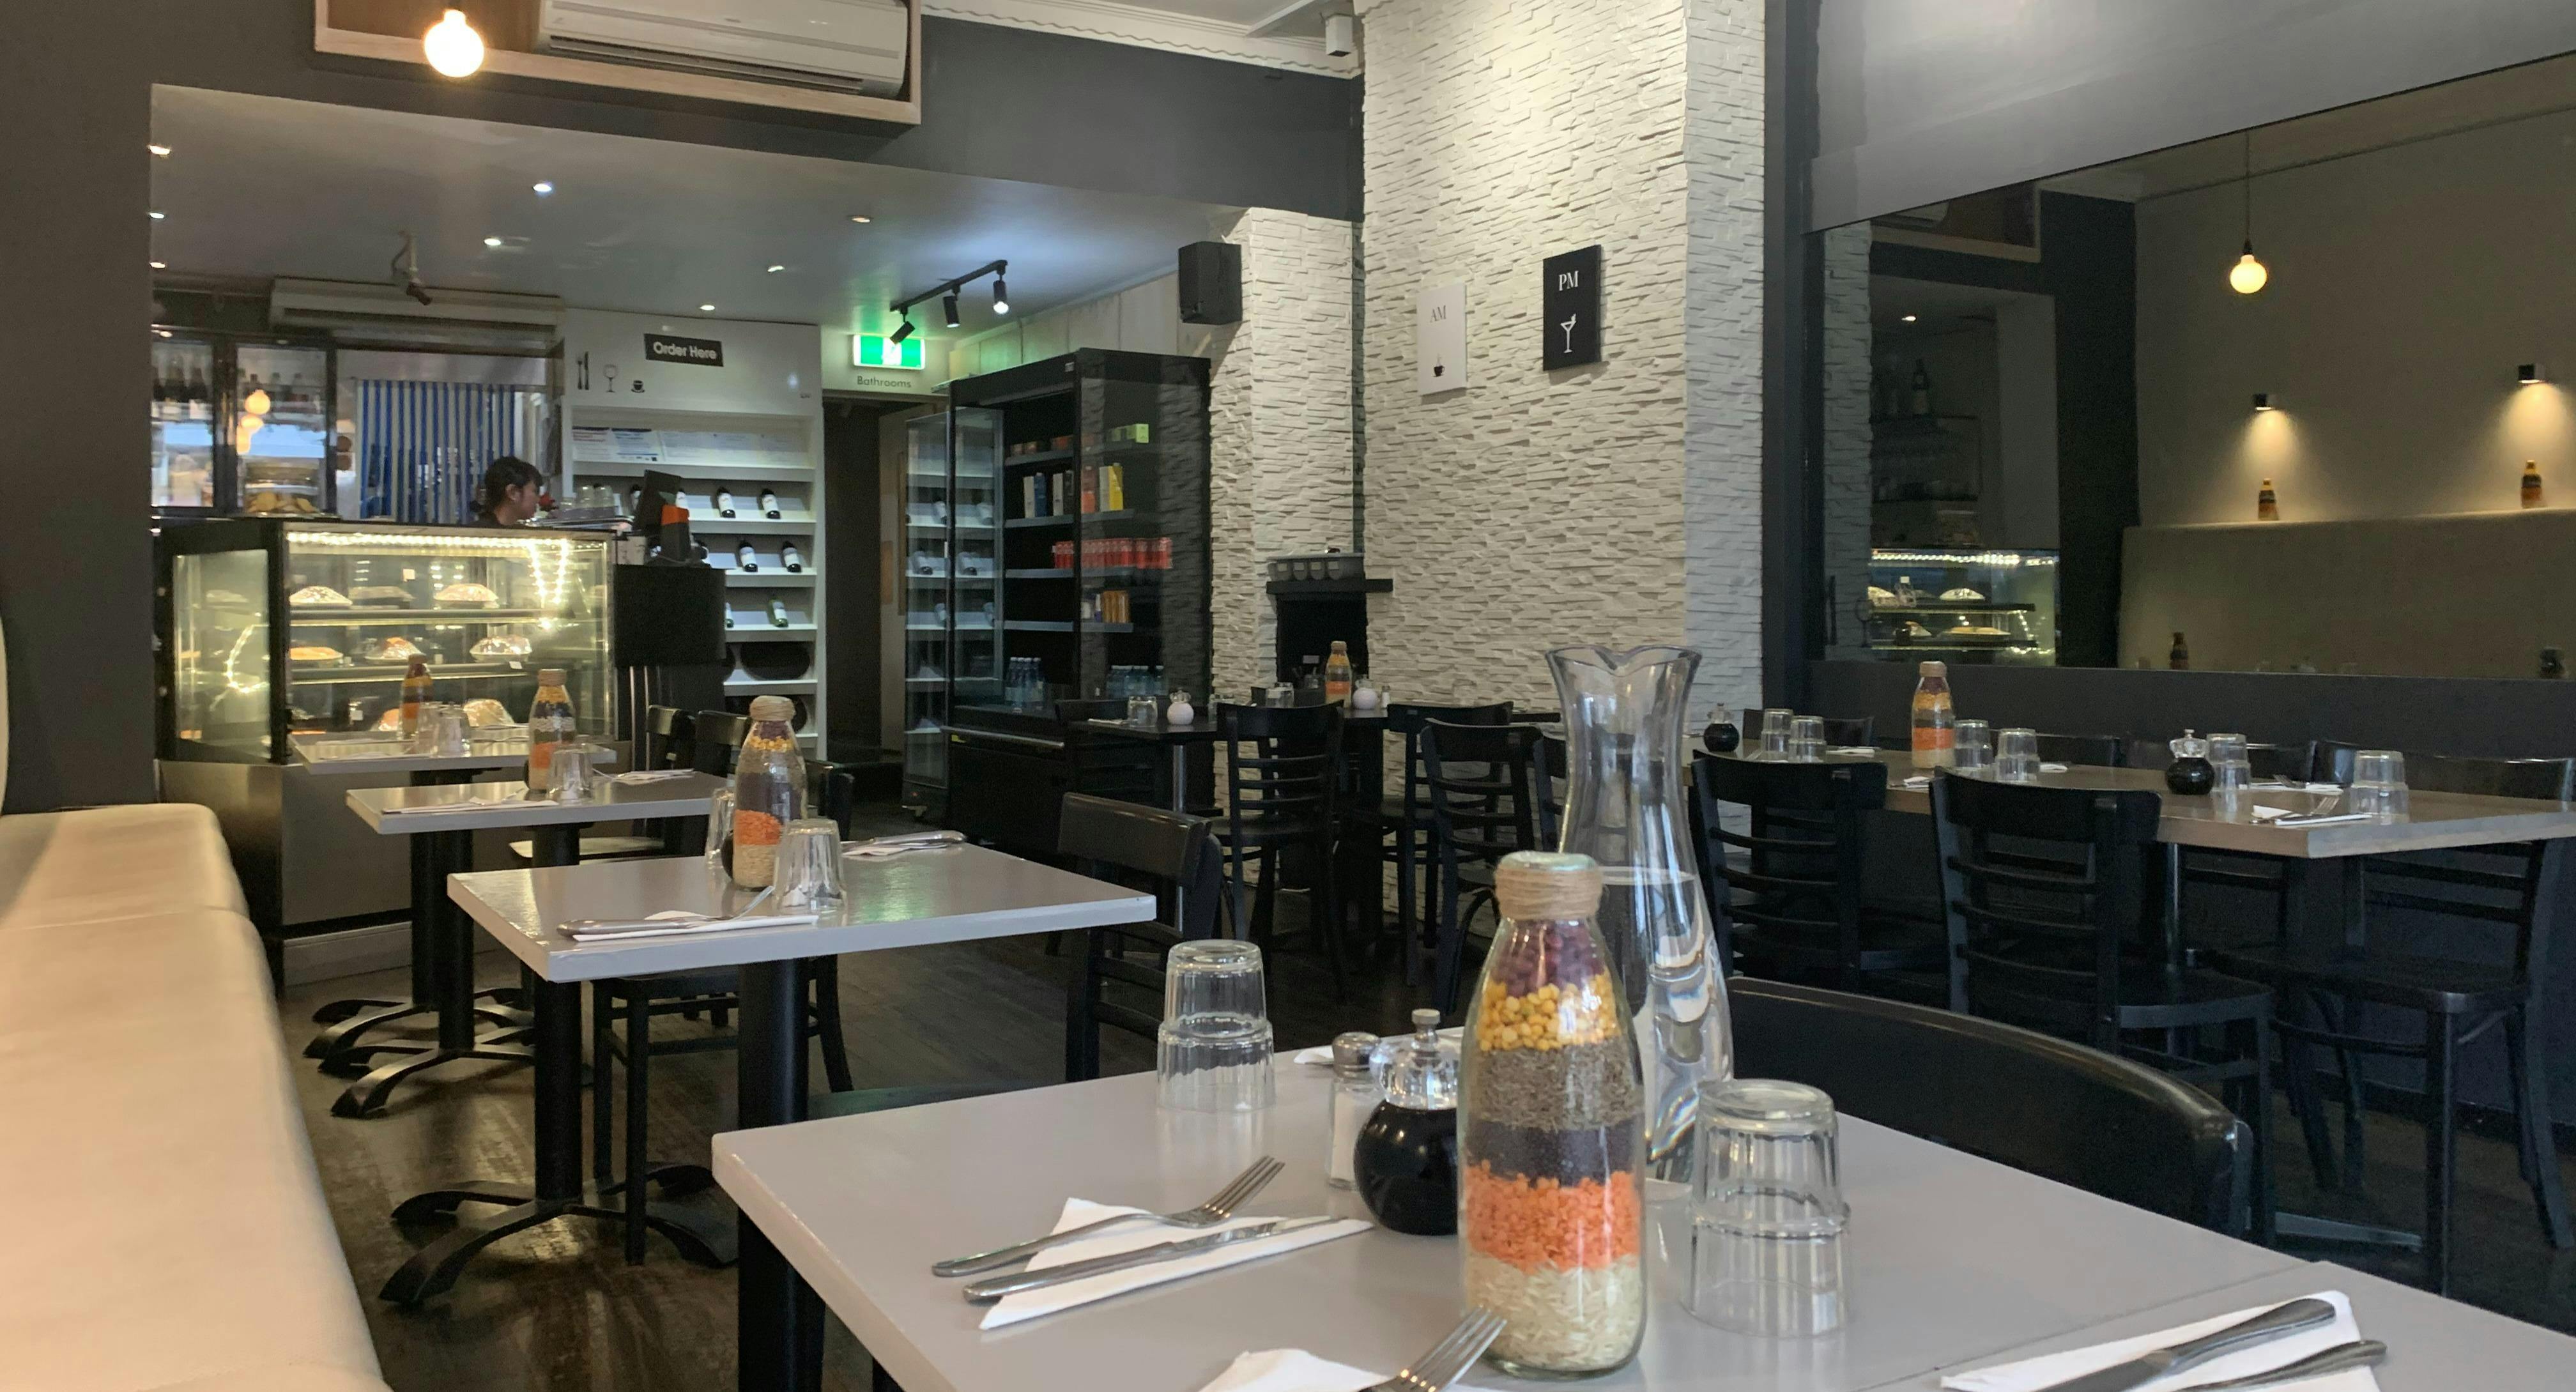 Photo of restaurant Verve Spice in South Yarra, Melbourne